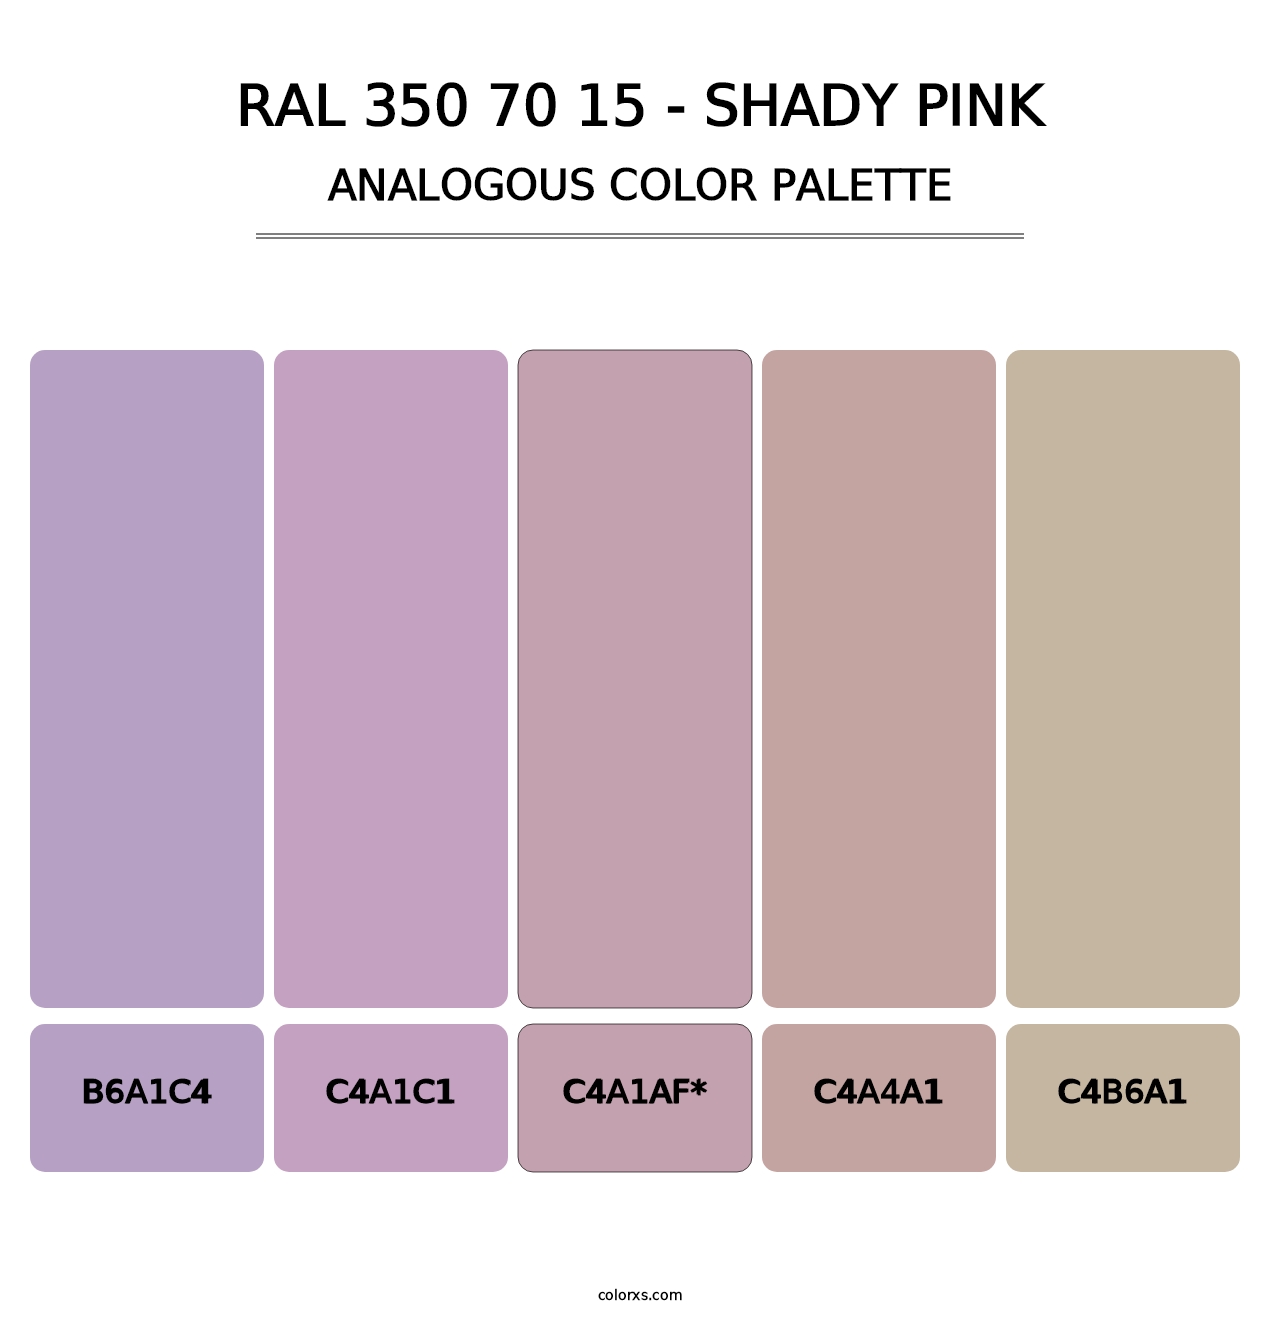 RAL 350 70 15 - Shady Pink - Analogous Color Palette